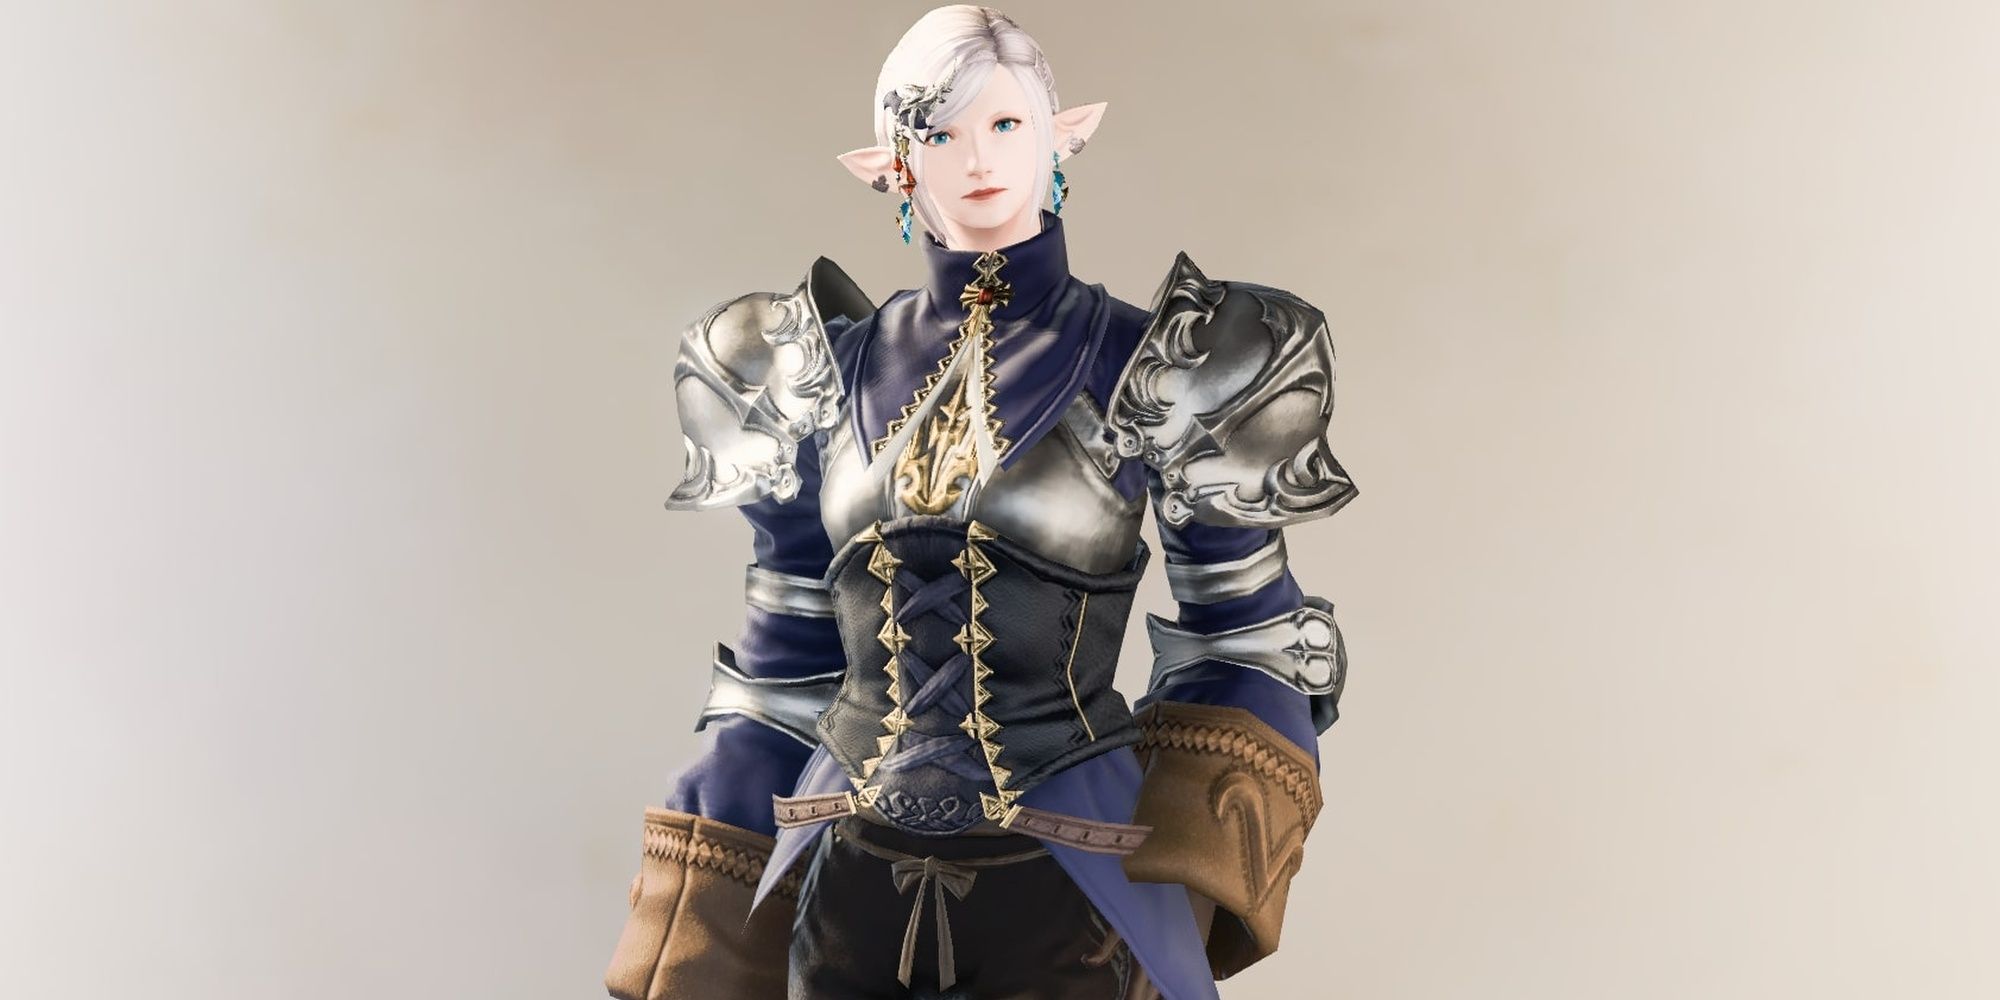 Final Fantasy 14 Character in Ivalice Armor Against an Off-White Background